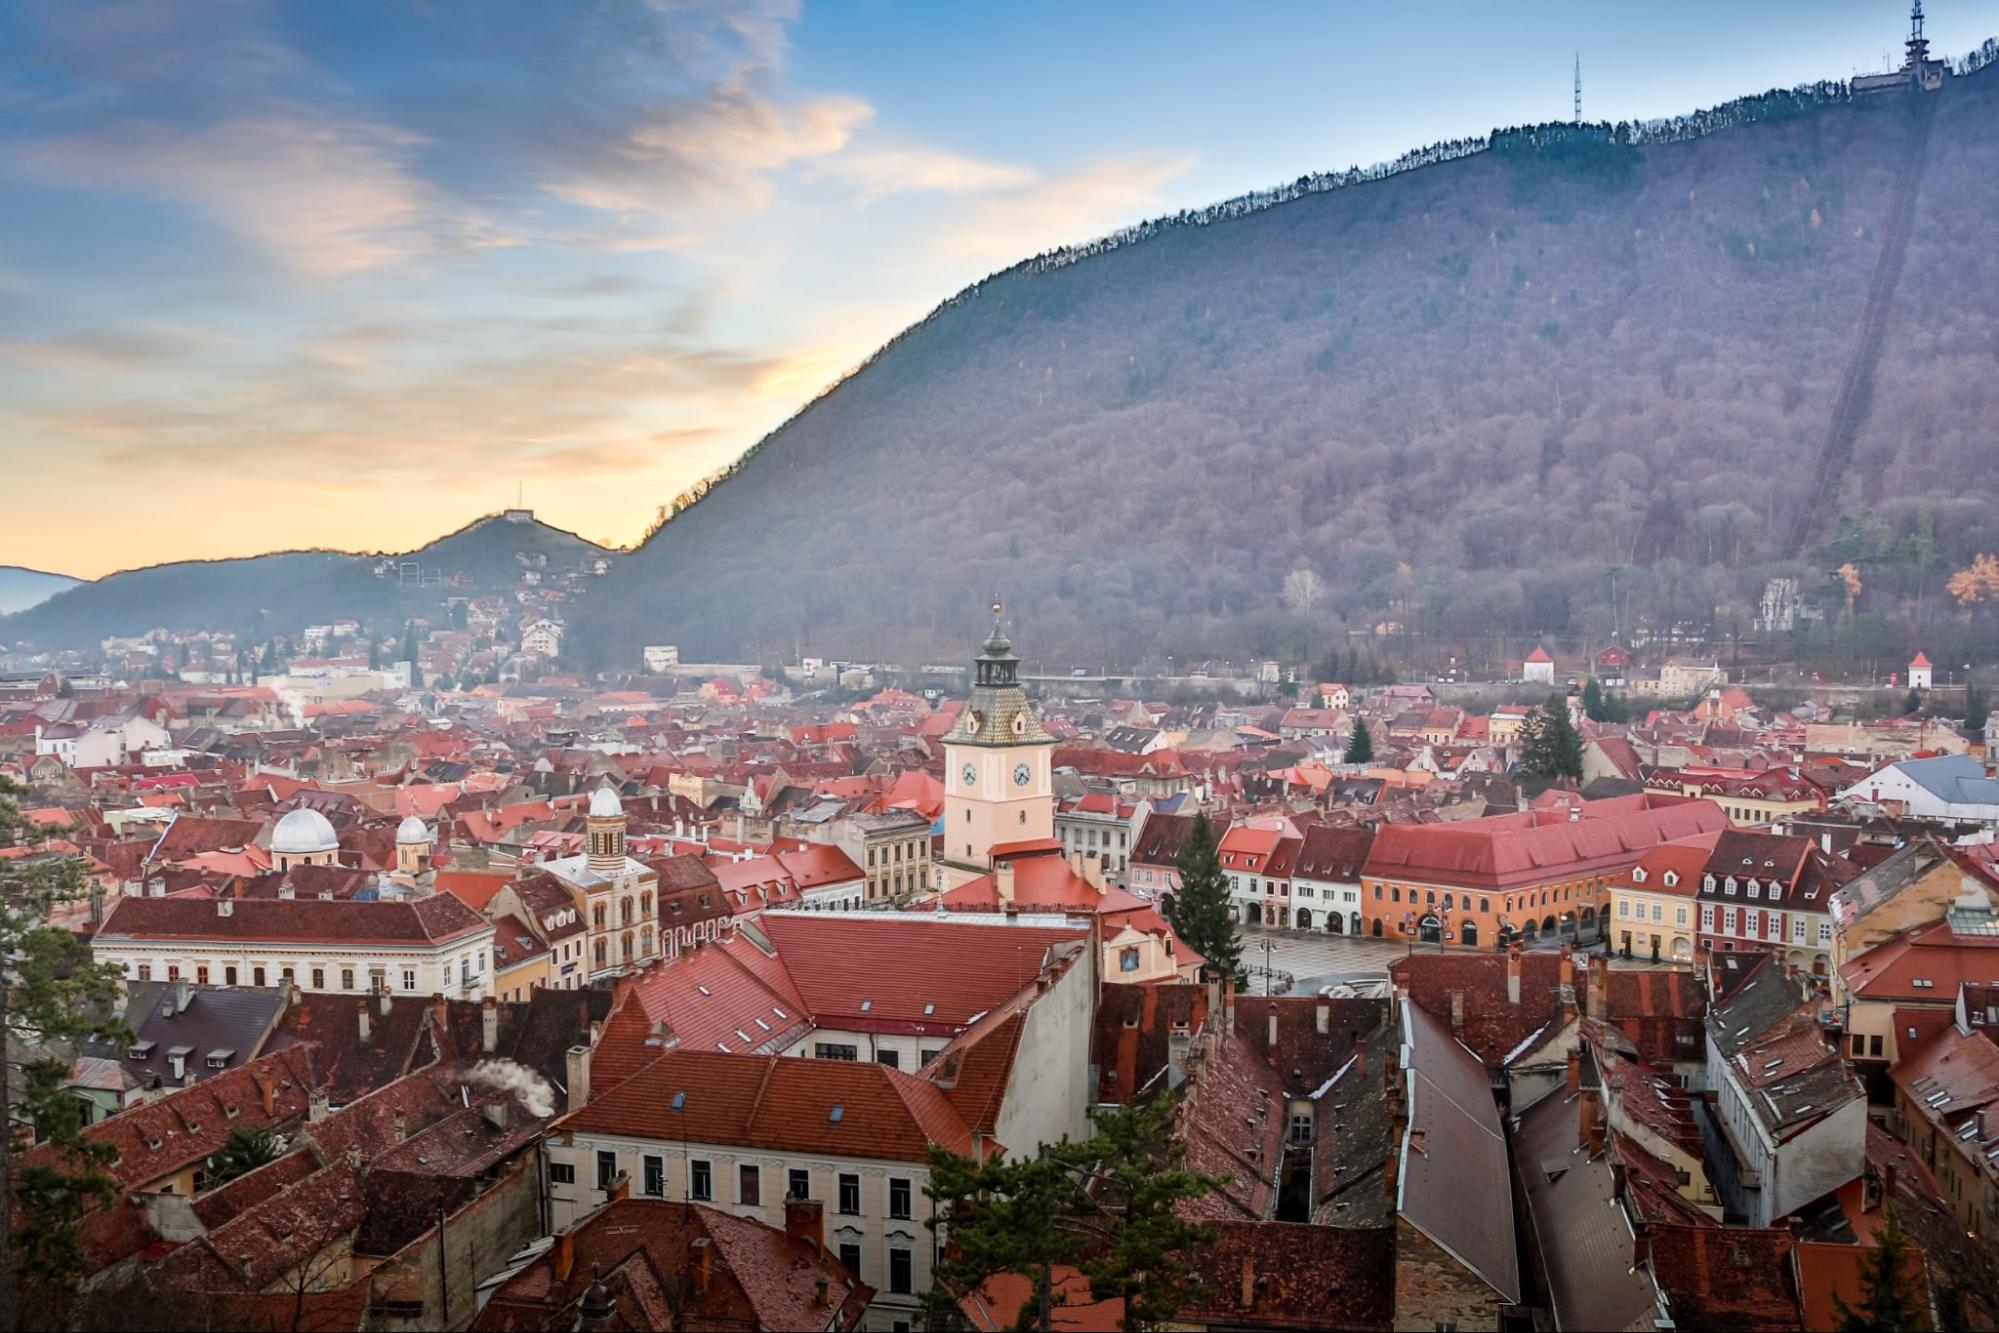 The central square of the old town. Brasov. Transylvania